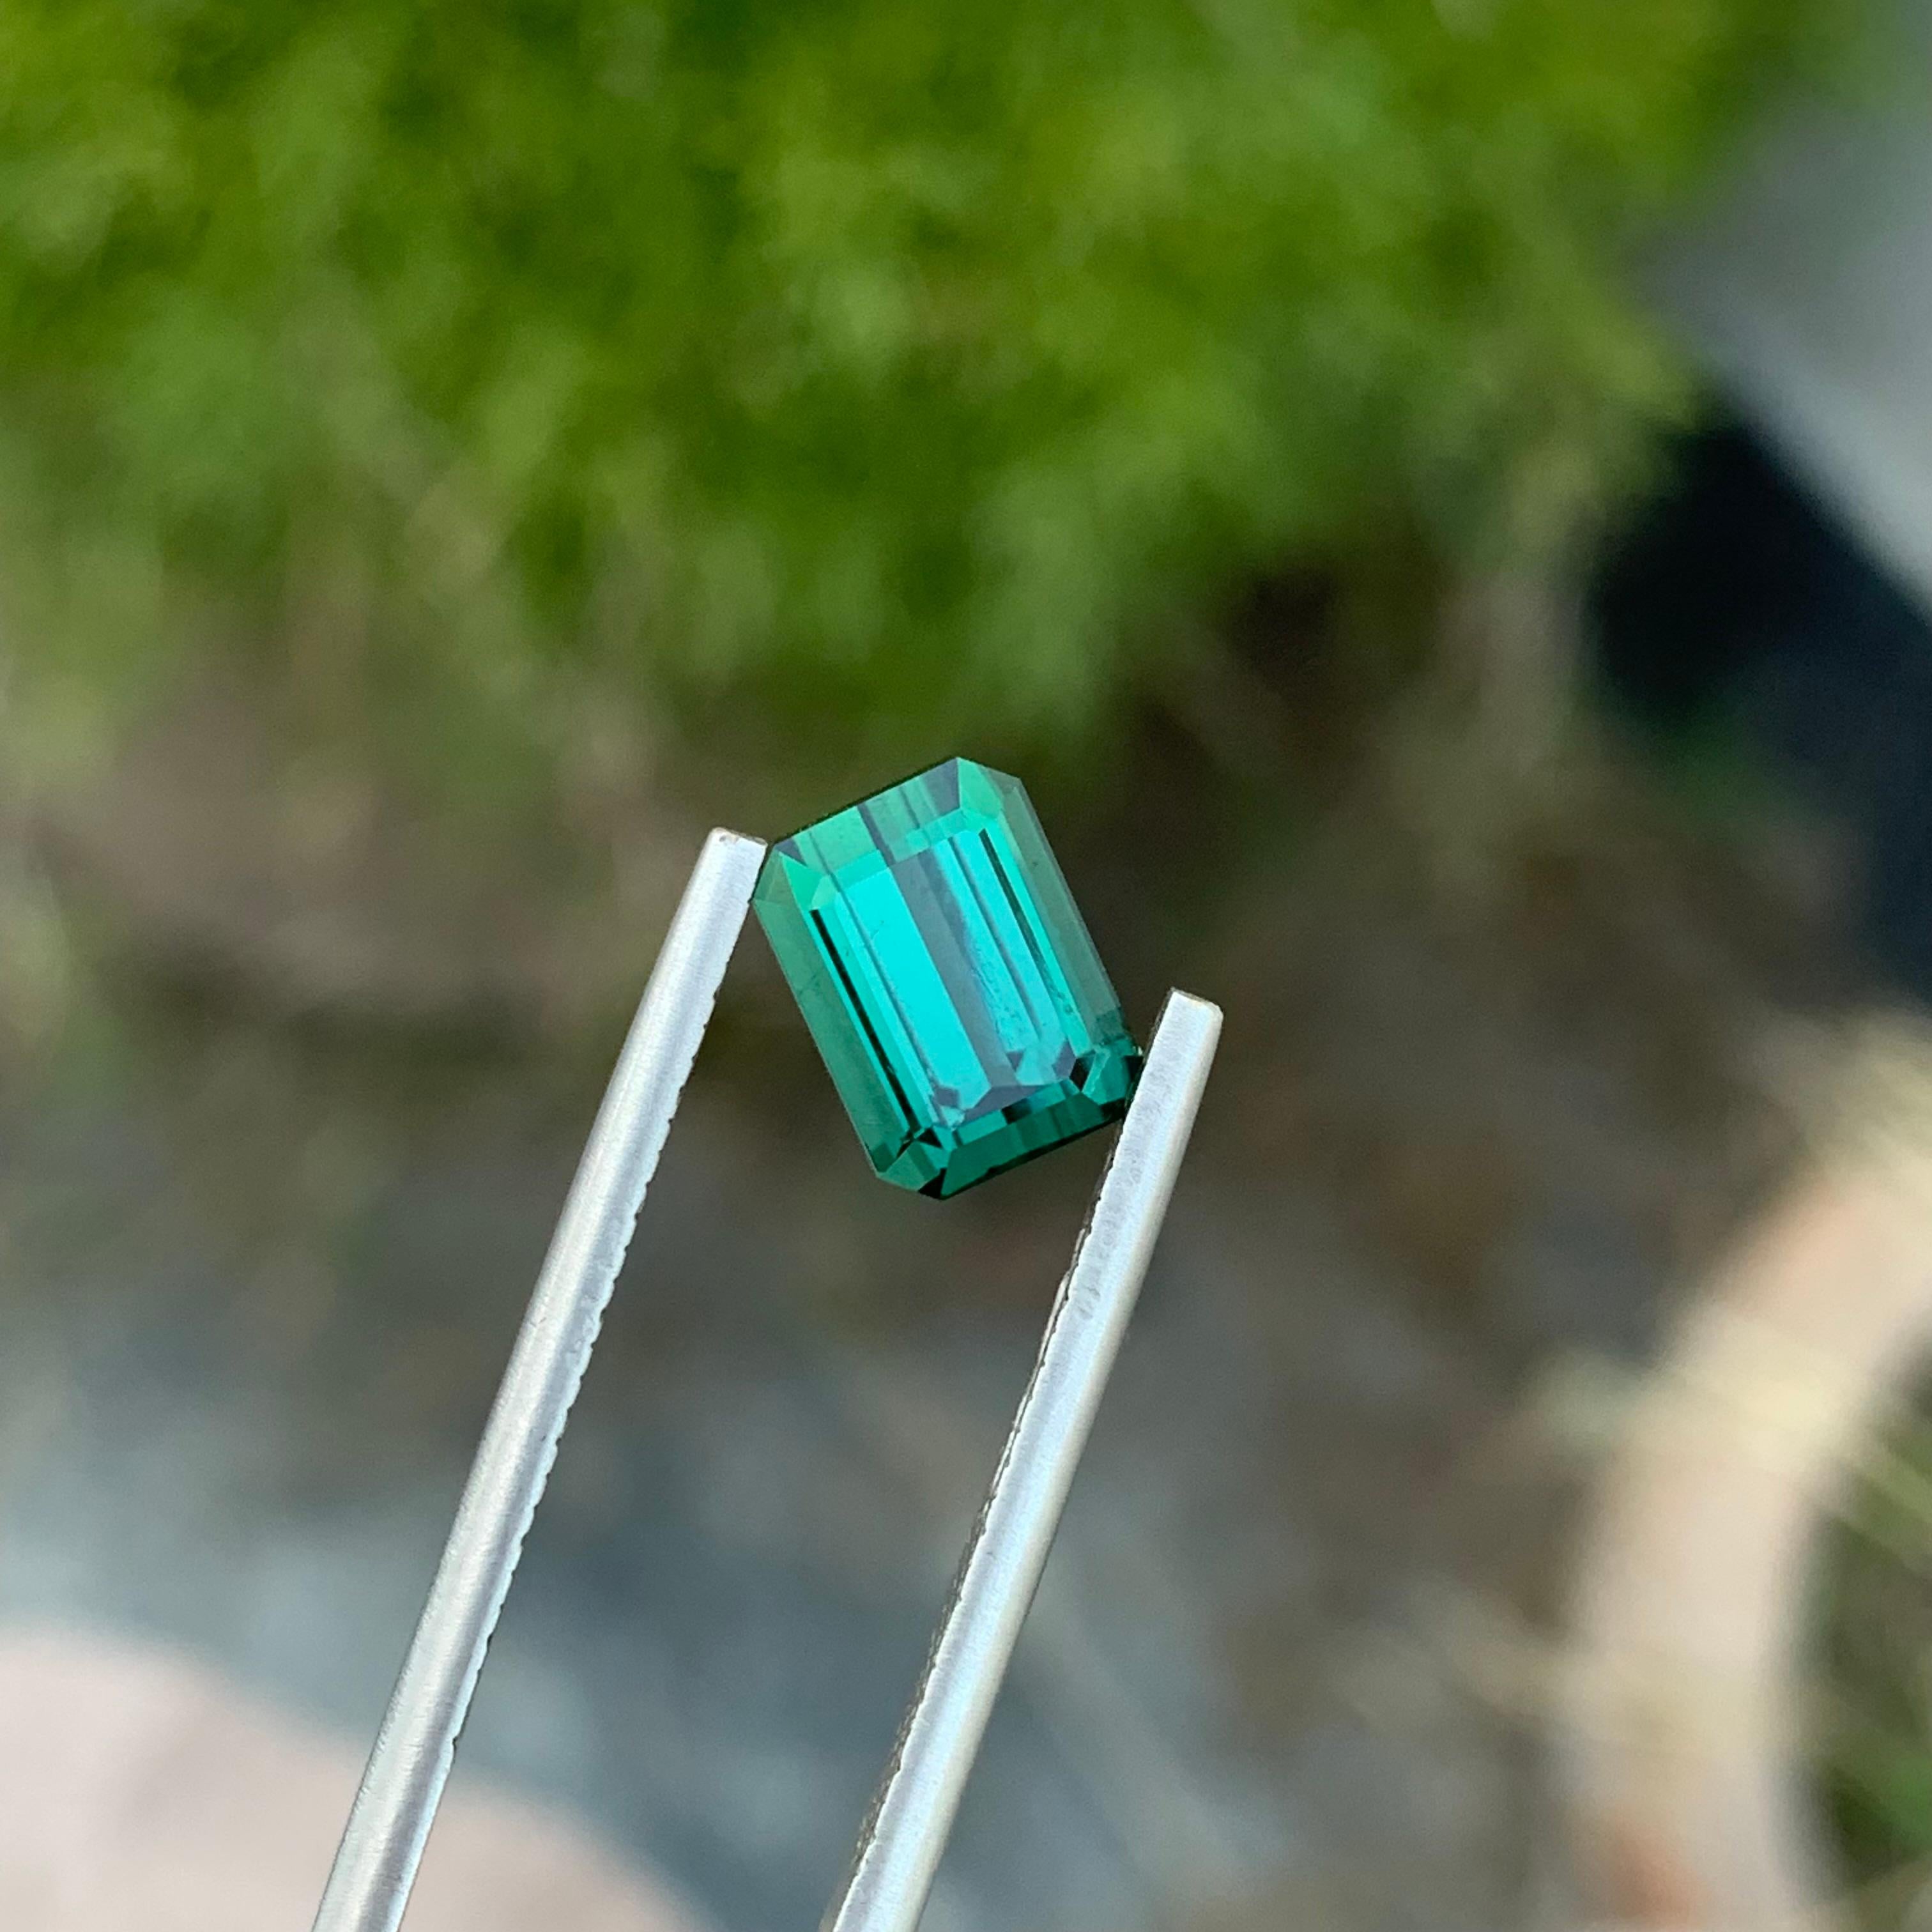 Loose Lagoon Tourmaline

Weight: 3.00  Carats
Dimension: 8.8 x 6.5 x 5.6 Mm
Colour: Lagoon
Origin: Afghanistan
Certificate: On Demand
Treatment: Non

Tourmaline is a captivating gemstone known for its remarkable variety of colors, making it a